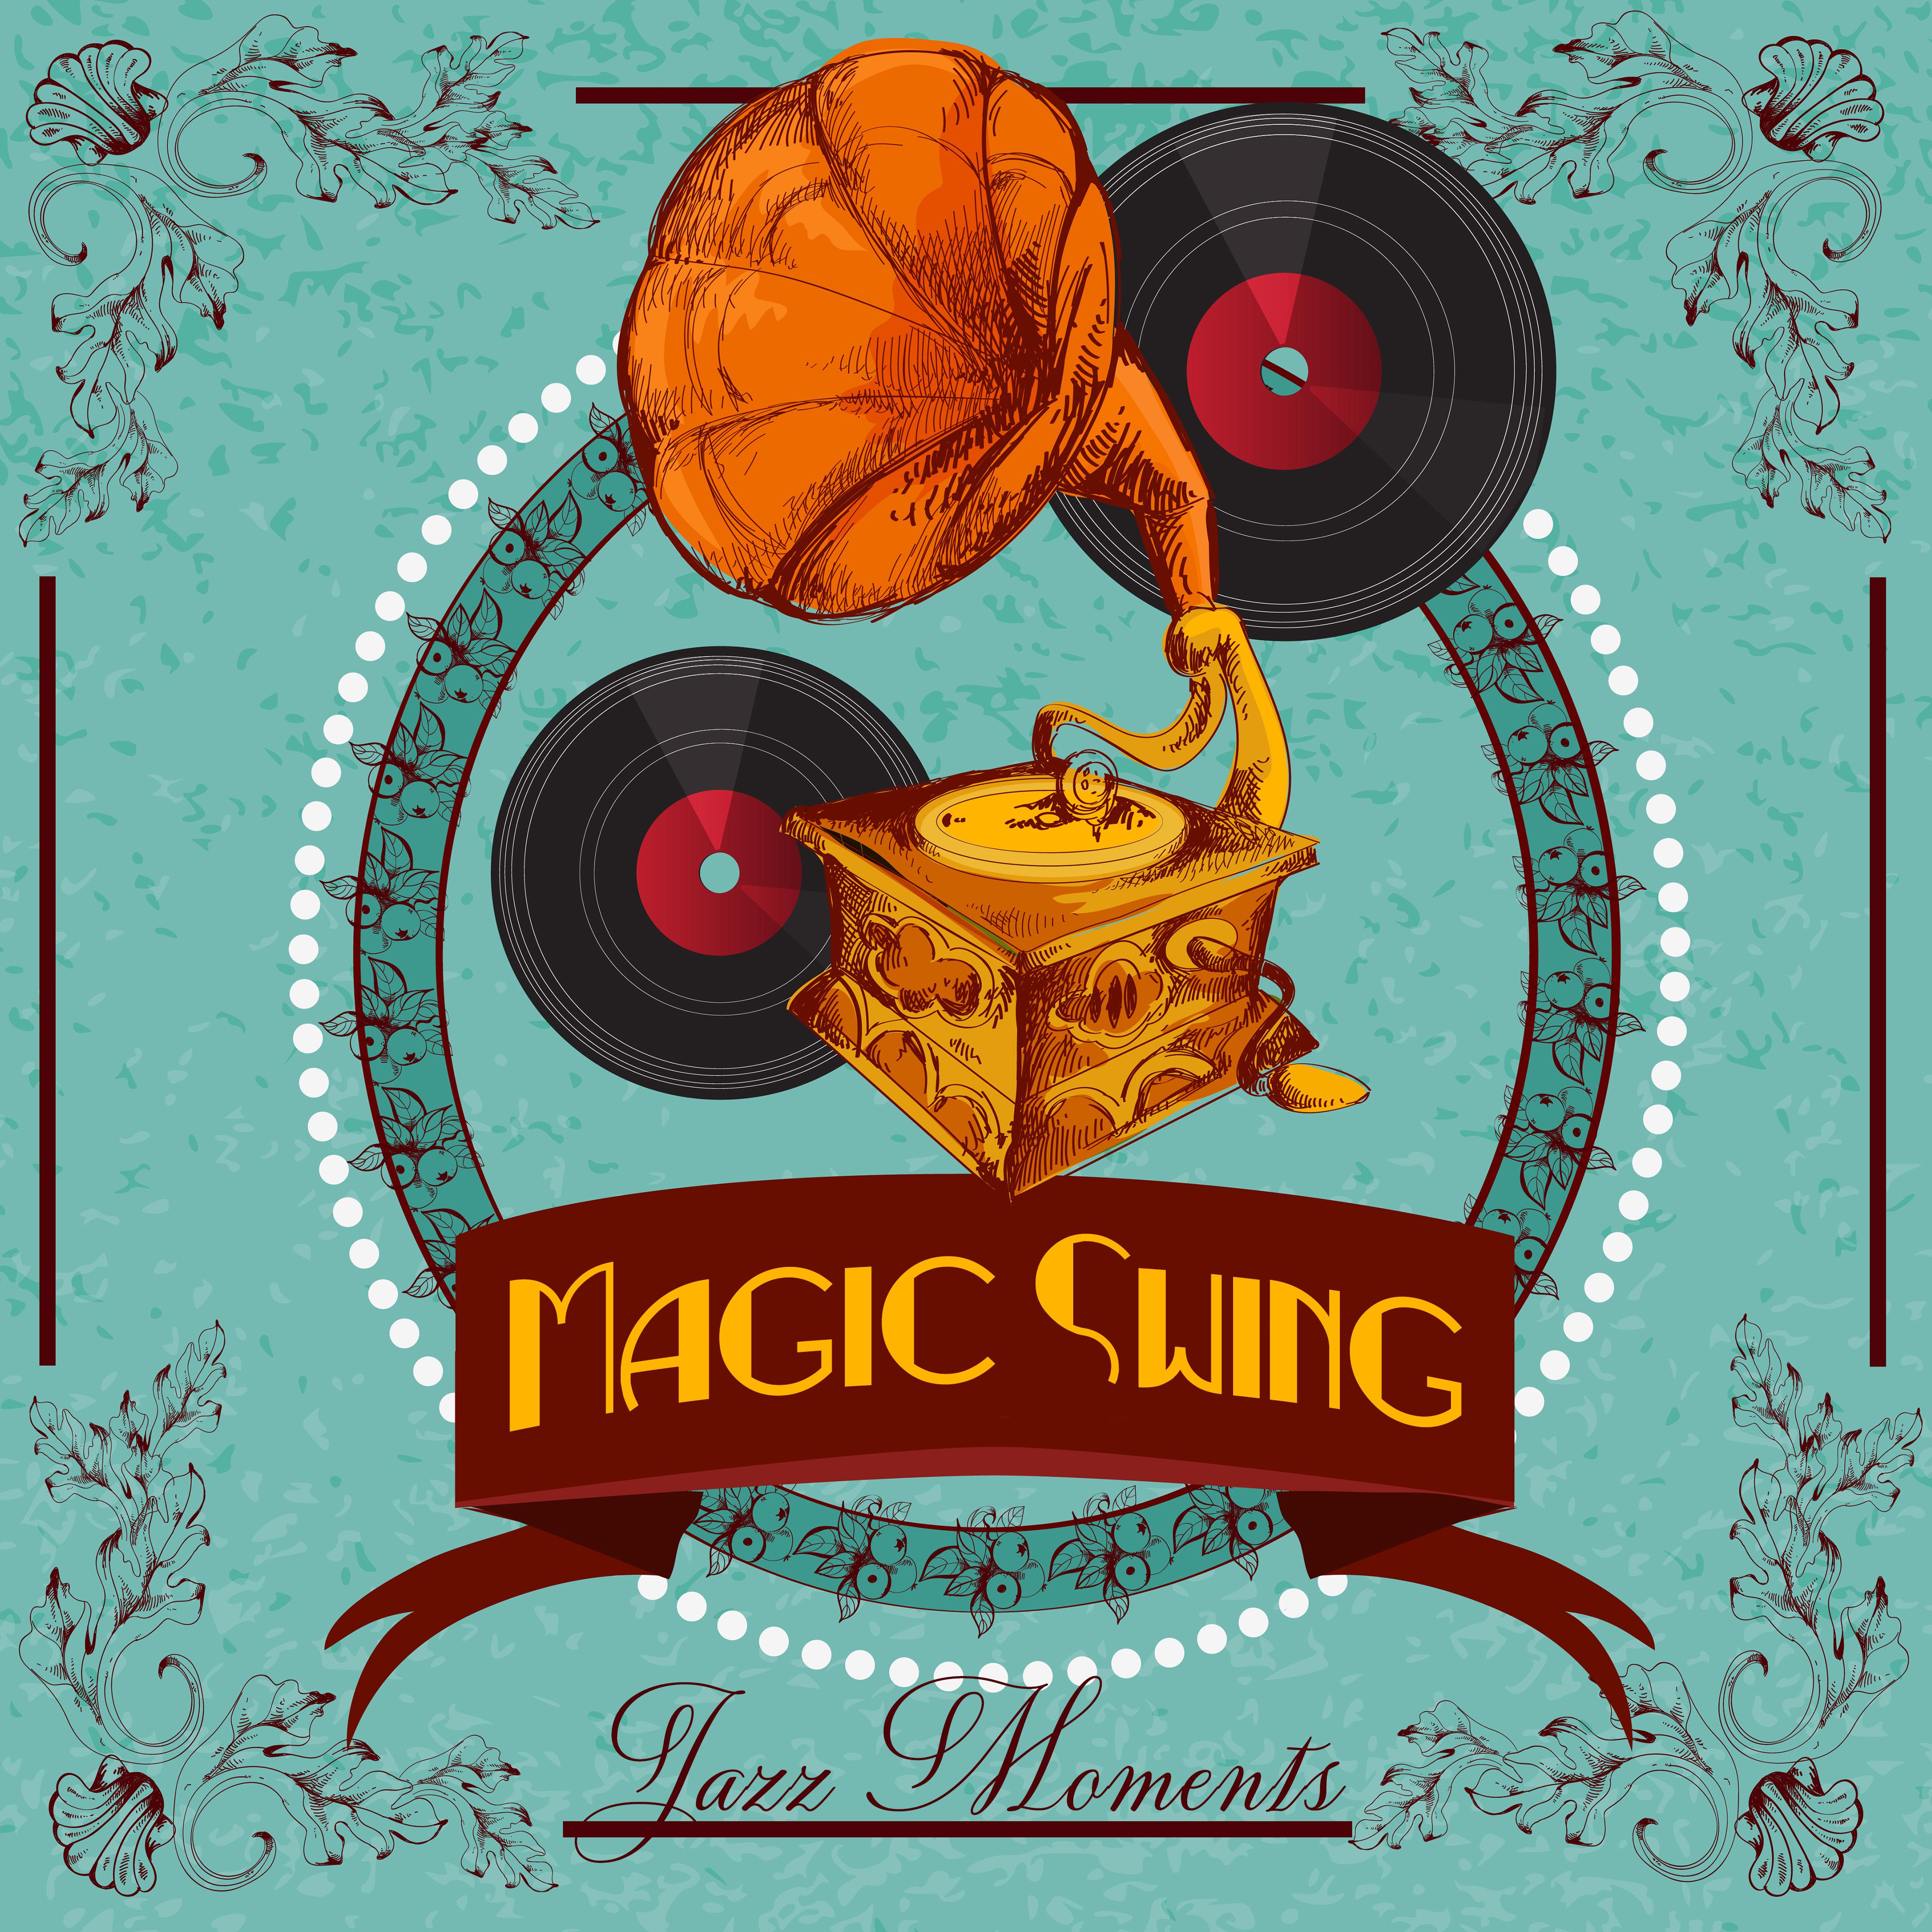 Magic Swing Jazz Moments: Instrumental Smooth Jazz with Good Atmosphere, Vintage Melodies, Climatic Sounds of Piano & Sax, 2019 Music